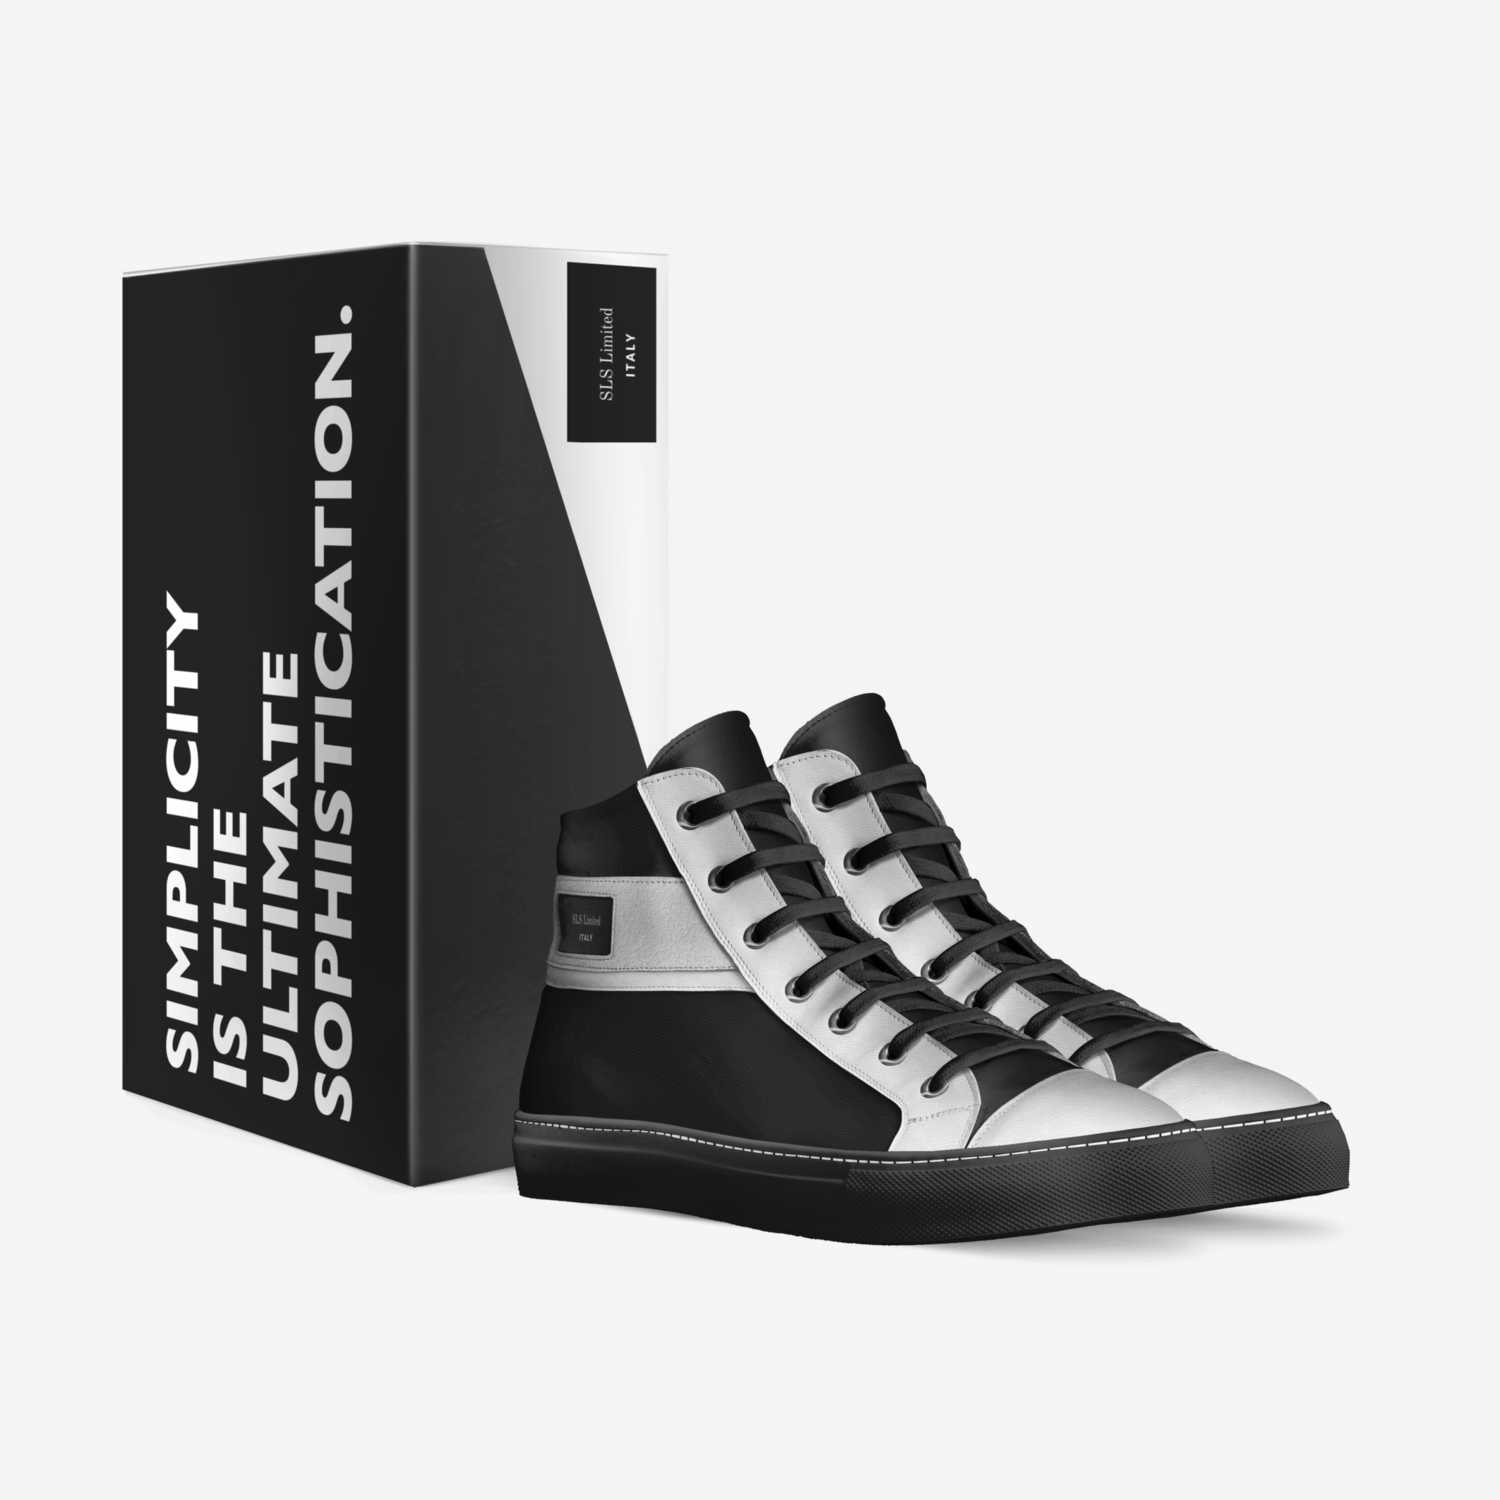 Tuxedo Hi-Top custom made in Italy shoes by Stefan L. Smith | Box view